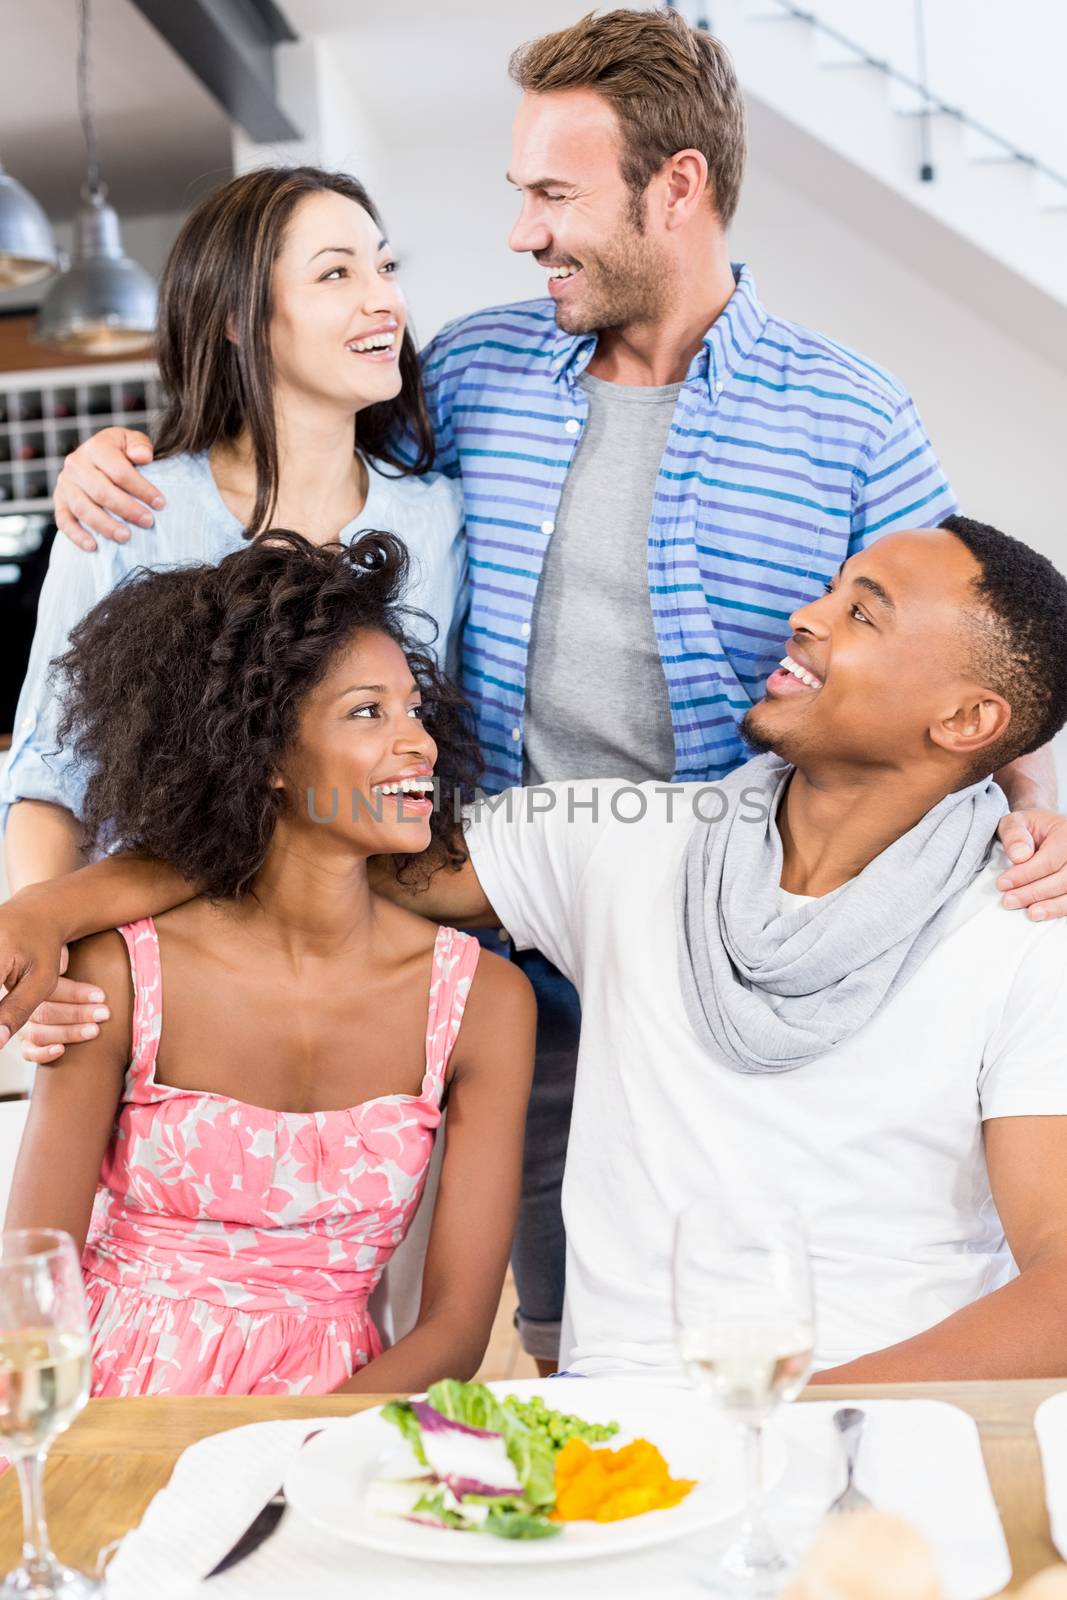 Friends looking at each other and smiling in dining room